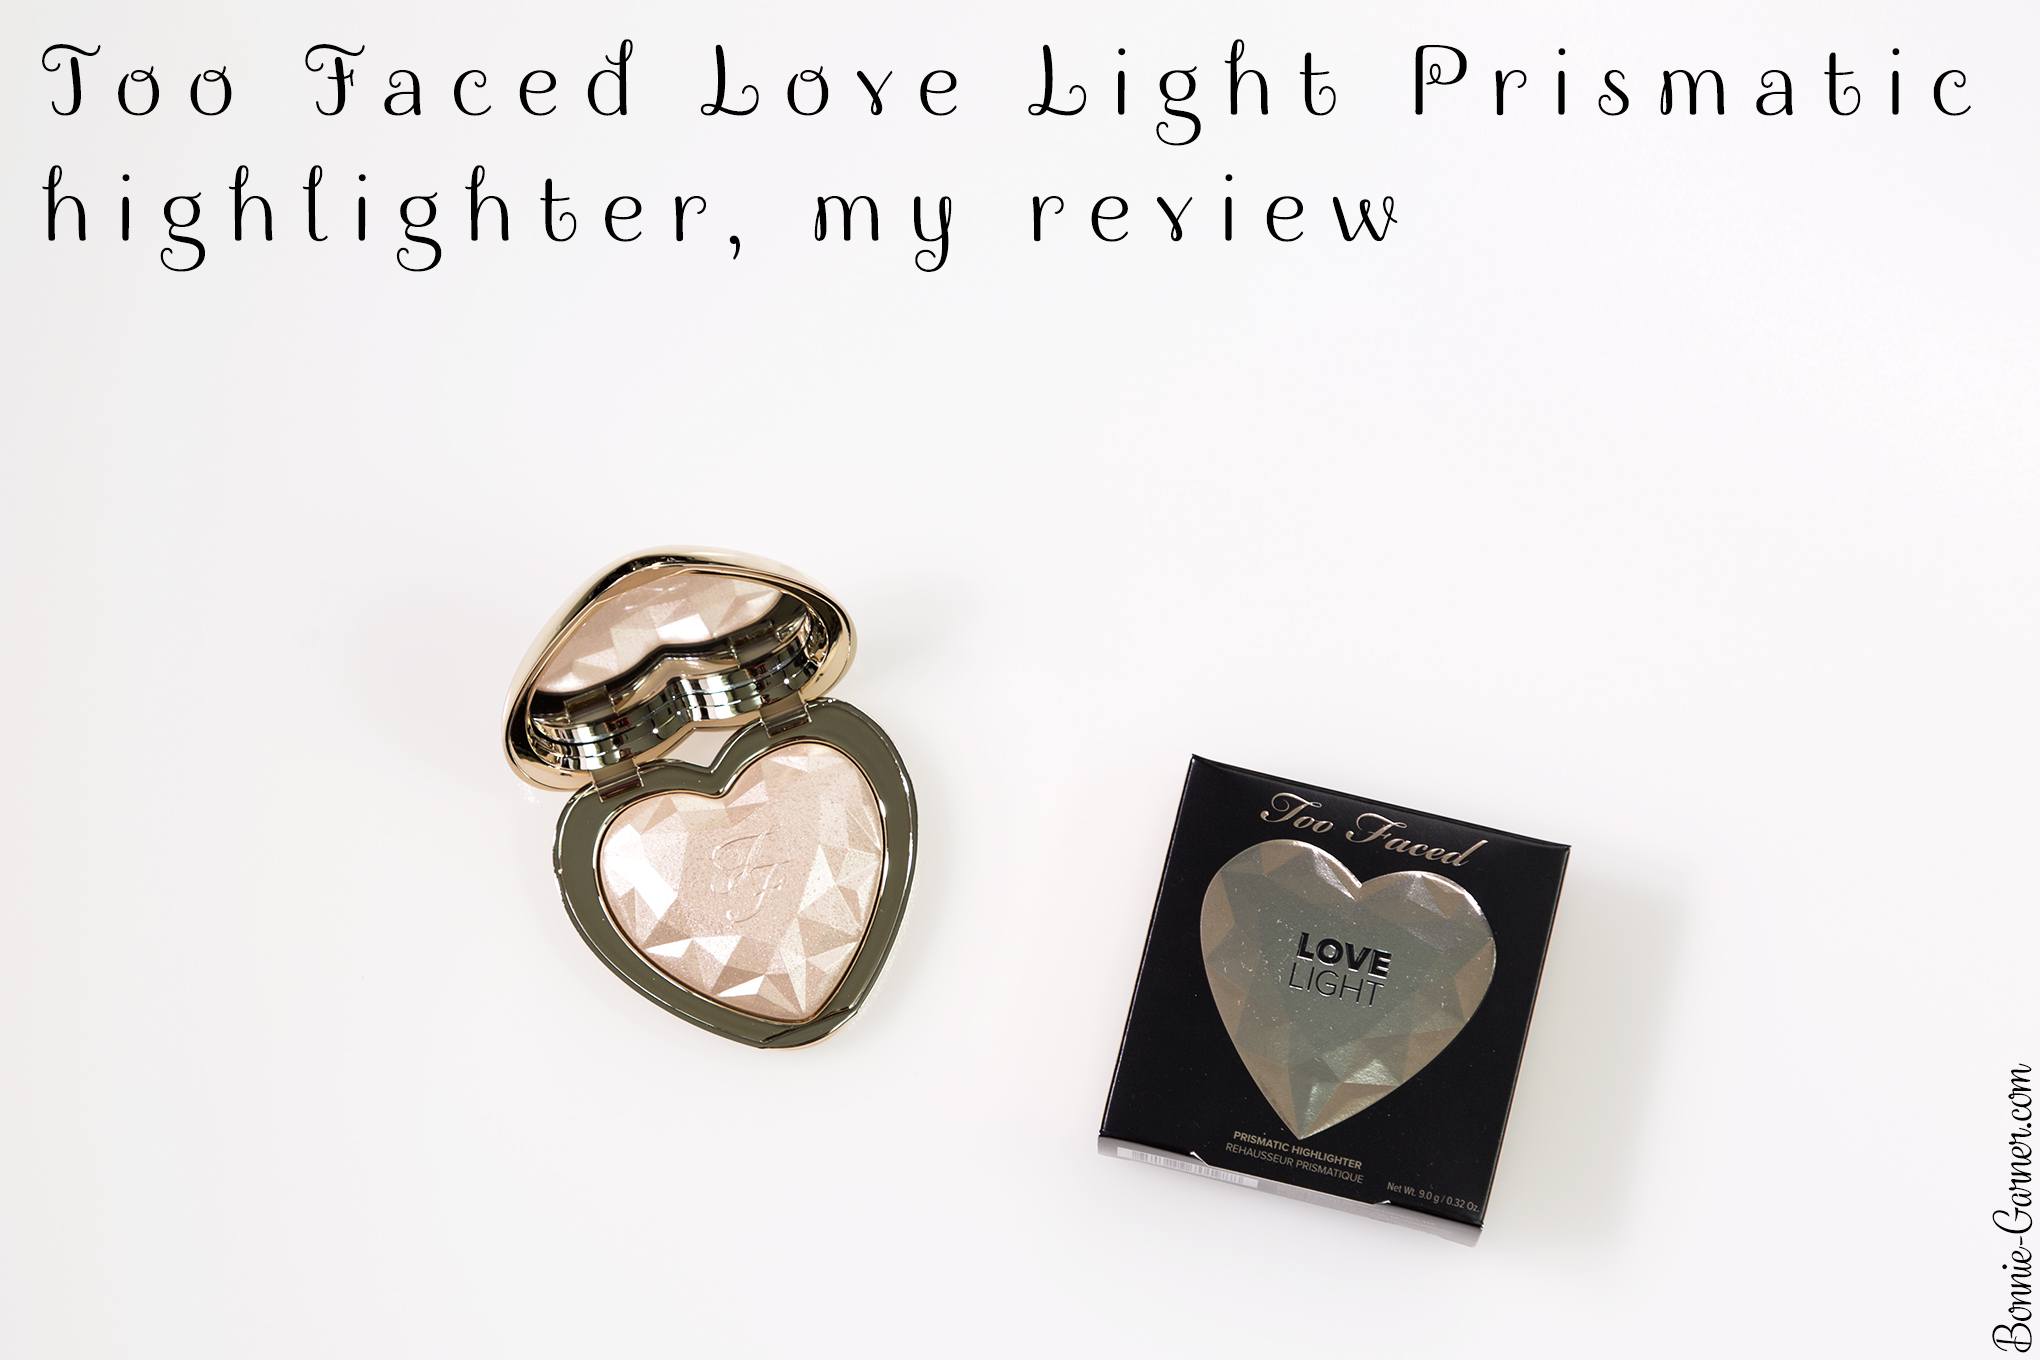 Too Faced Love Light Prismatic highlighter, my review